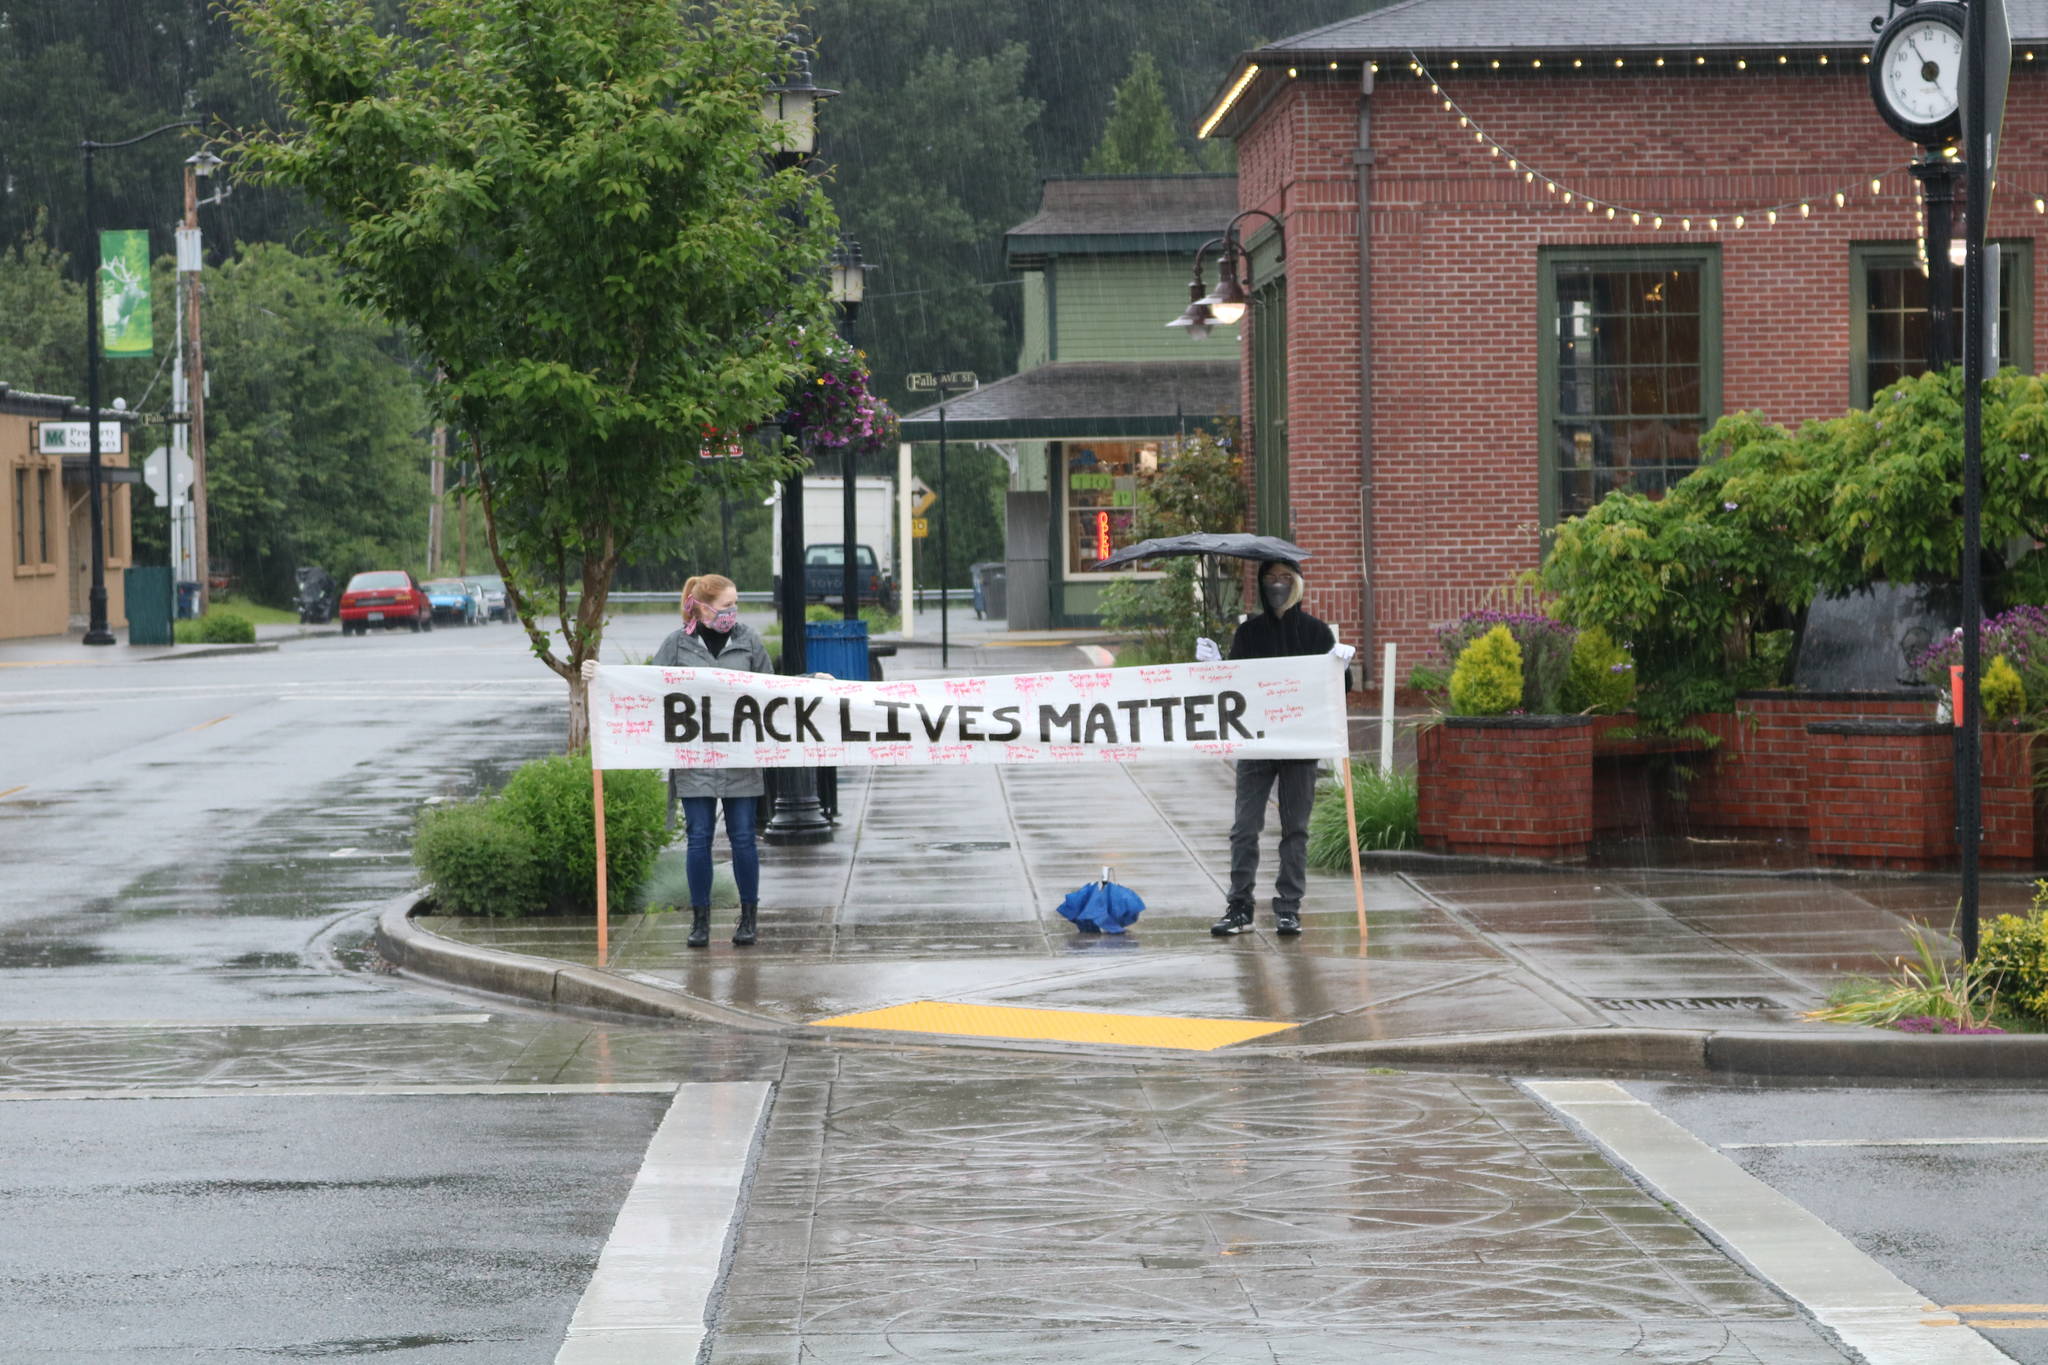 Protesters gathered in downtown Snoqualmie on May 30 to voice their opposition to police violence against people of color. Aaron Kunkler/staff photo